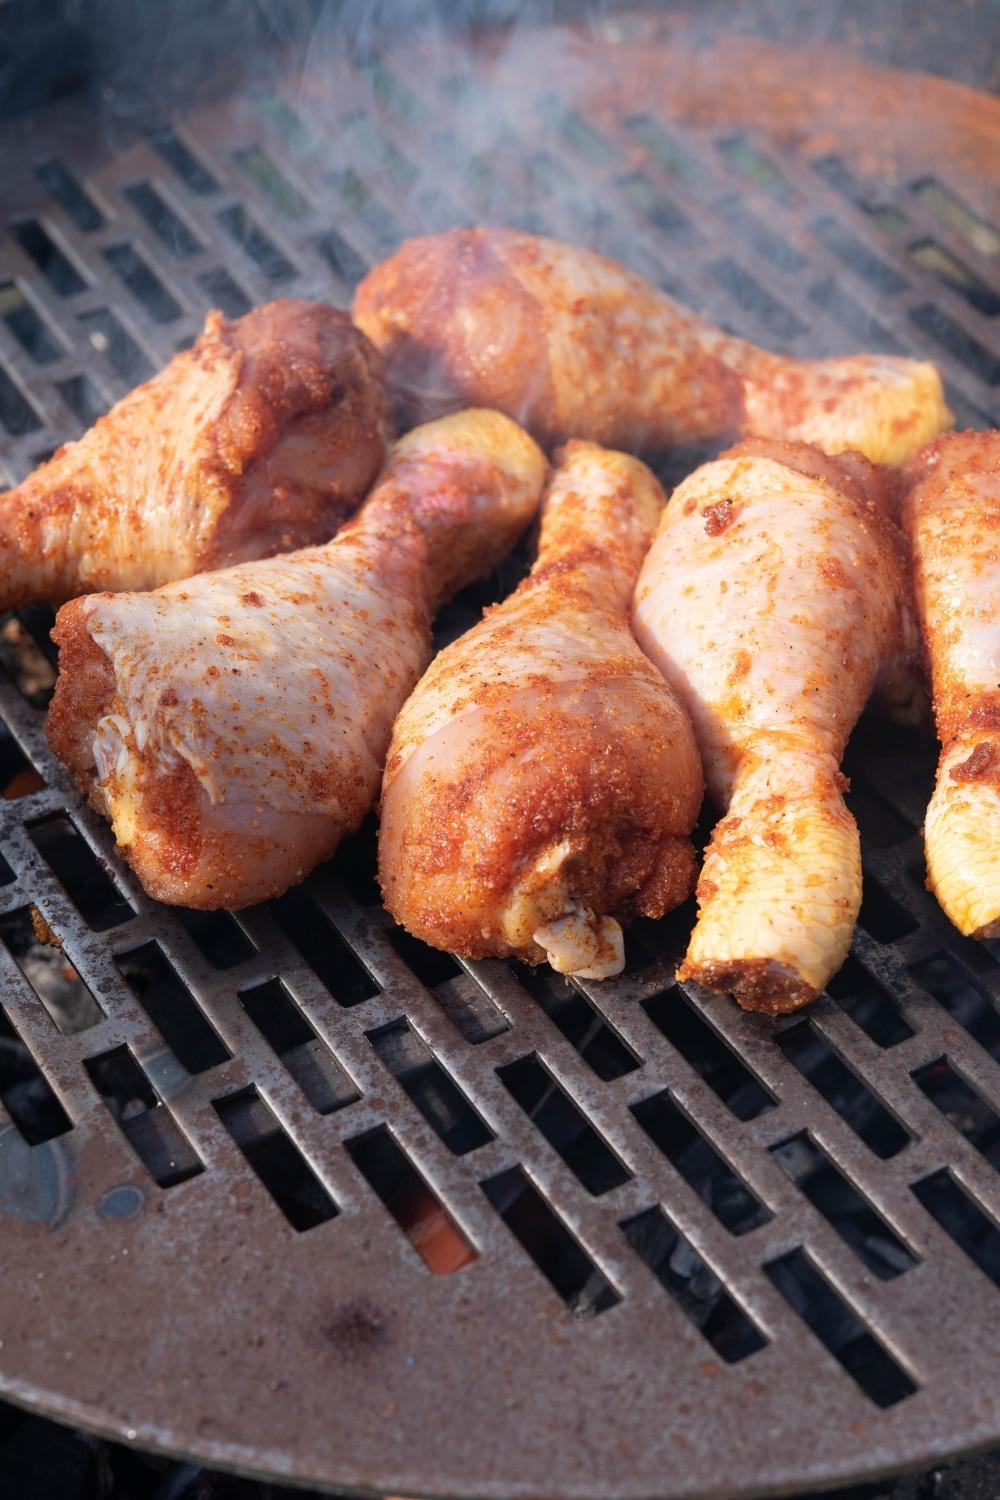 Six raw chicken drumsticks cooking on a charcoal grill.